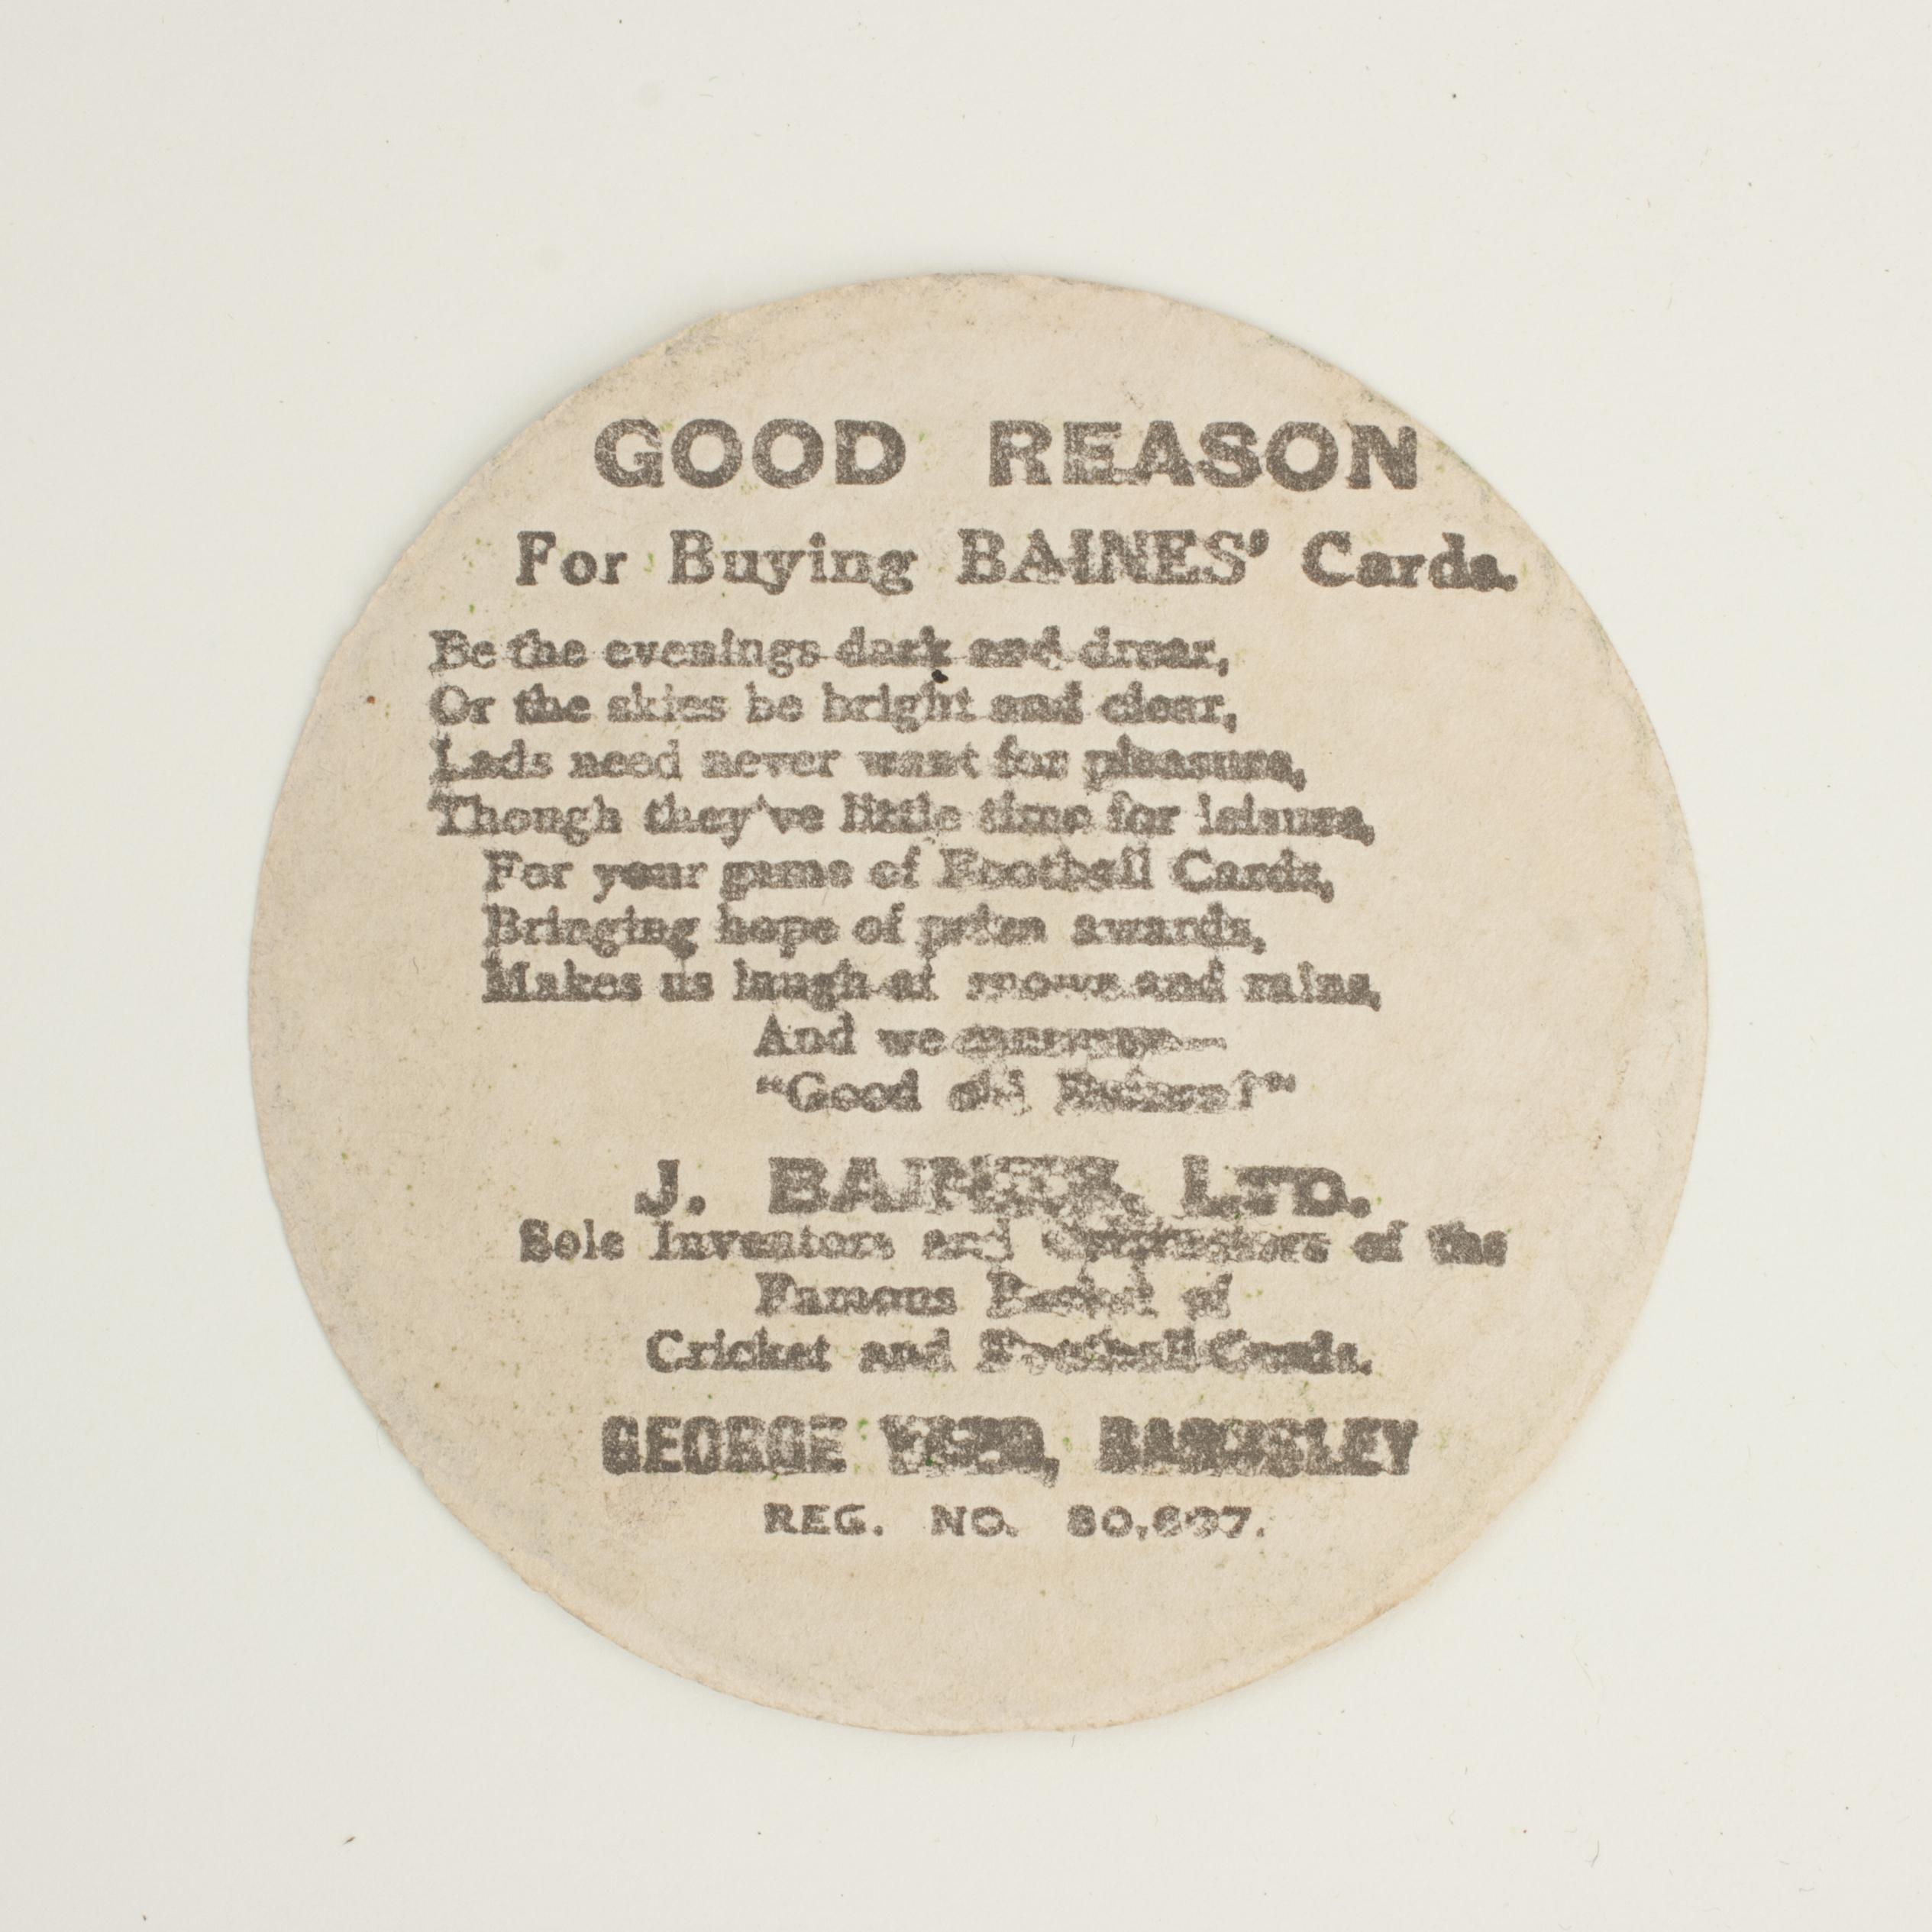 Baines Golfing trade card, Swindon.
A rare circular golf trade card in the shape of a bramble golf ball. Made by the toy shop owner from Bradford, John Baines. Baines went on to produce not only football cards but eventually covered scores of